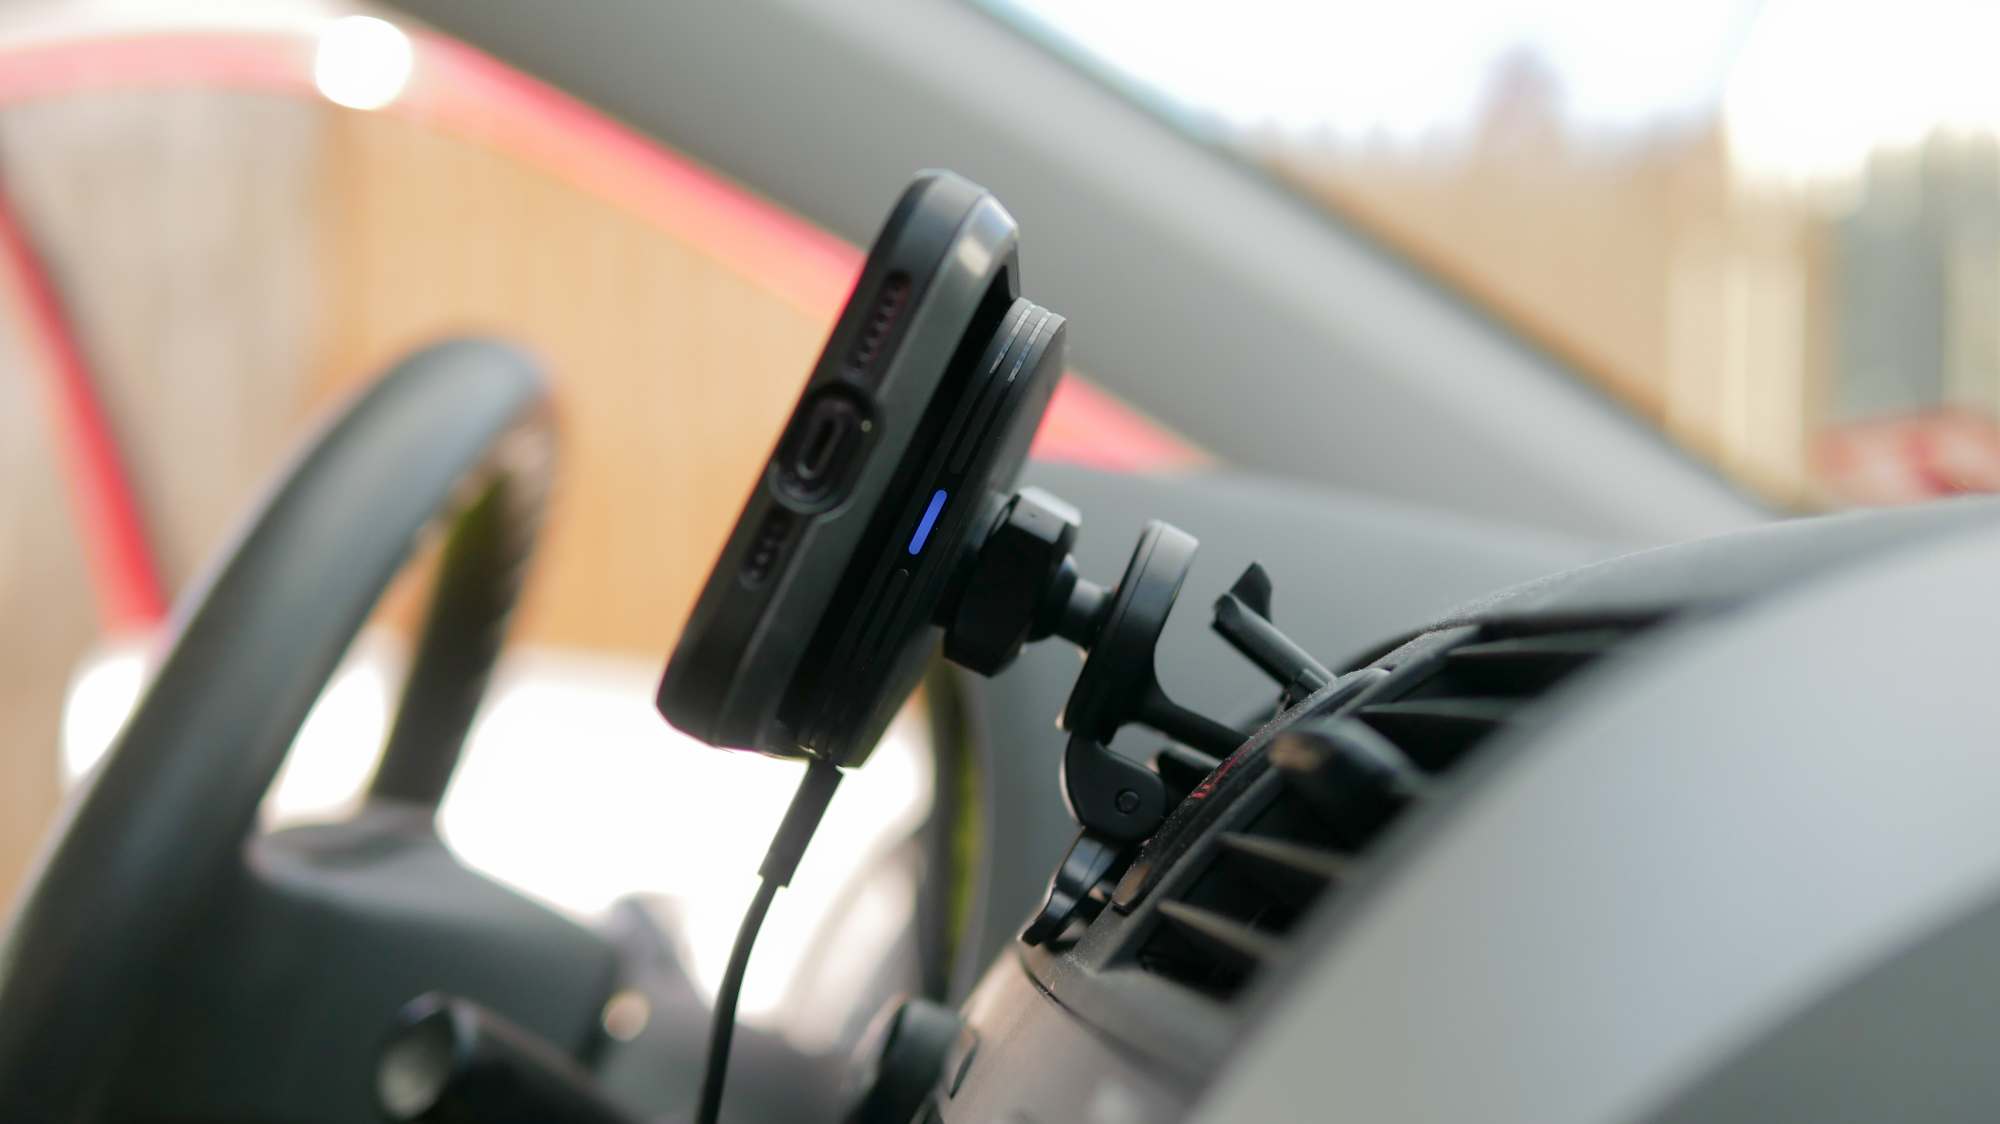 ESR HaloLock MagSafe Car Charger attached to vent clip in car with iPhone.